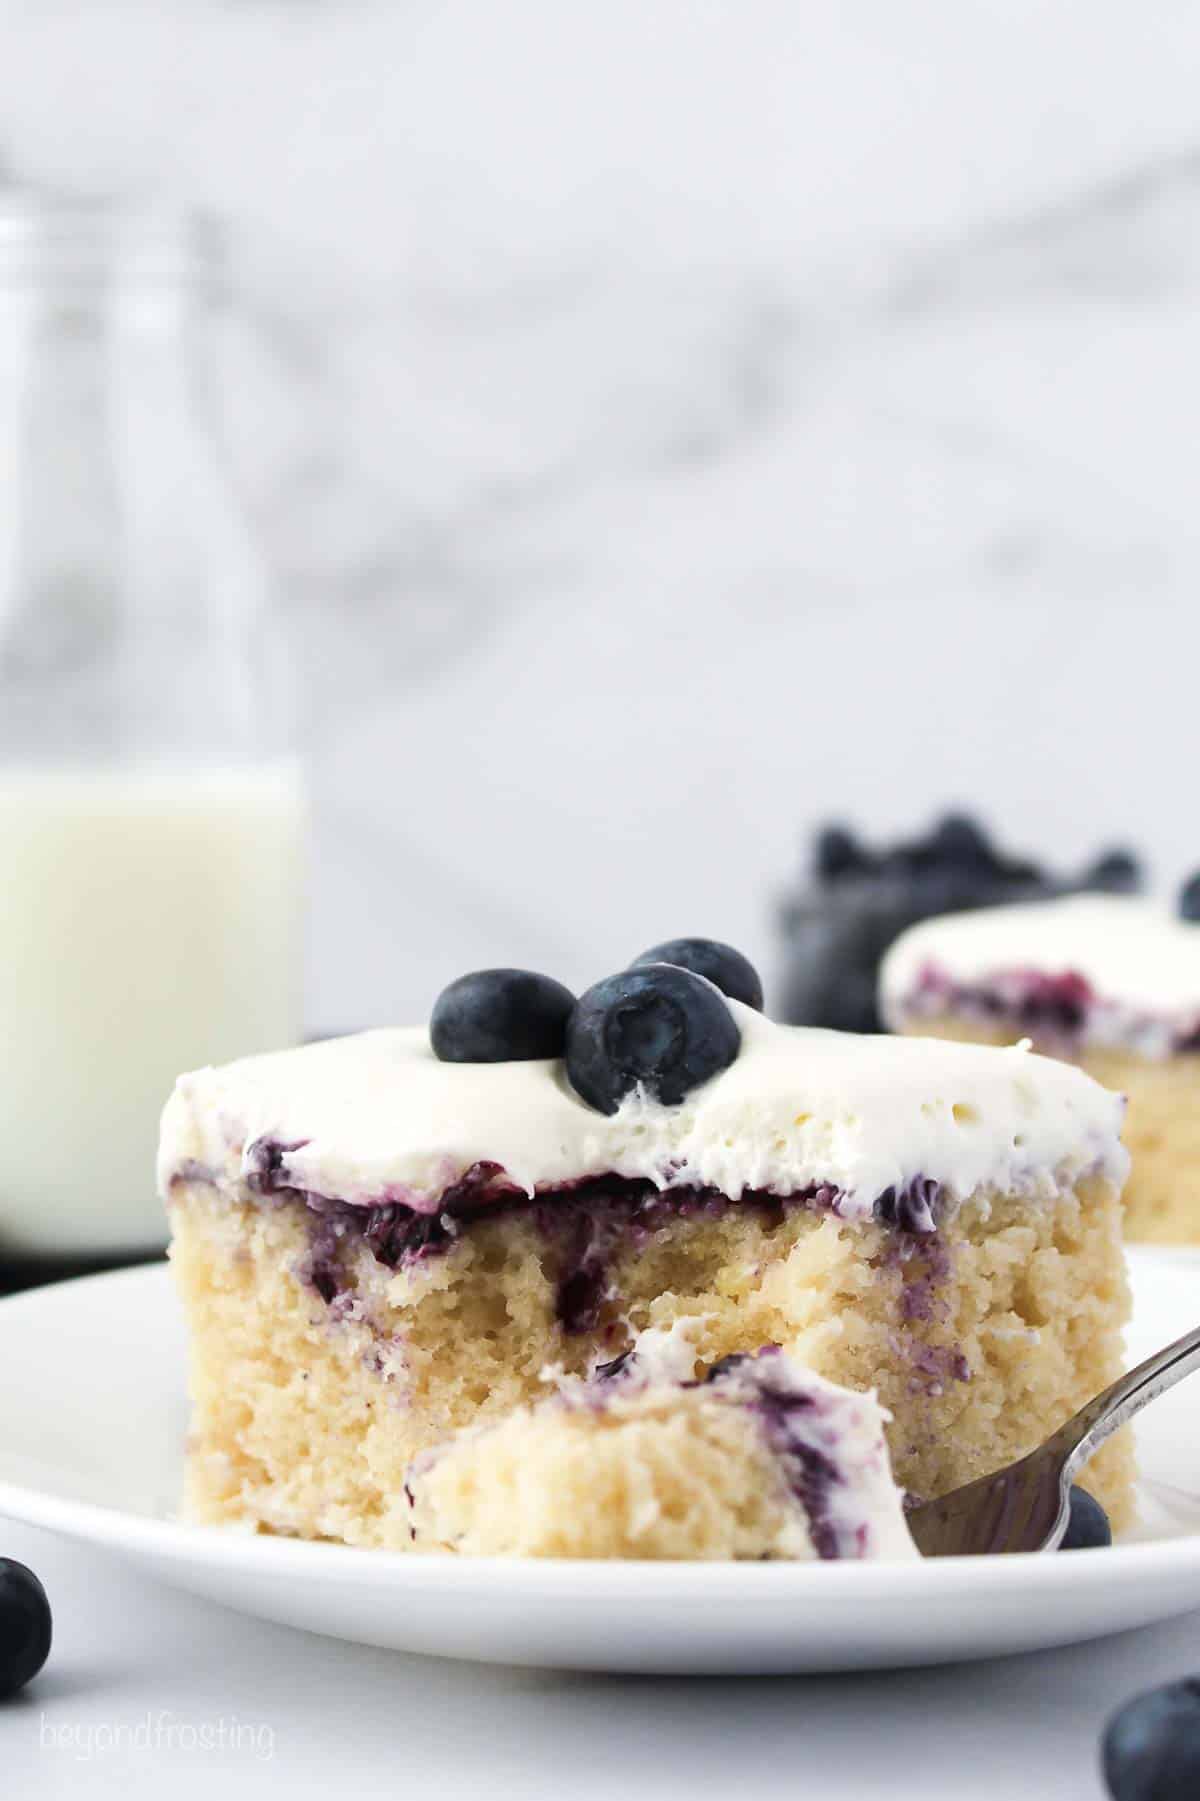 a slice of cake on a white plate garnished with blueberries